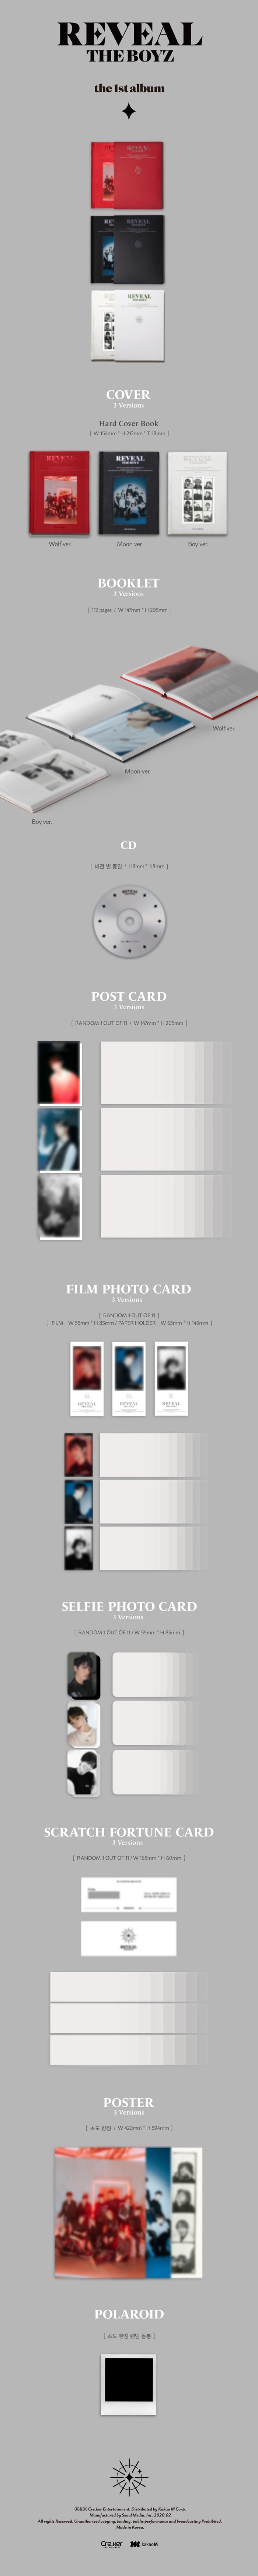 1 CD
1 Booklet (112 pages)
1 Post
1 Film Photo
1 Selfie Photo Card
1 Scratch Fortune Card